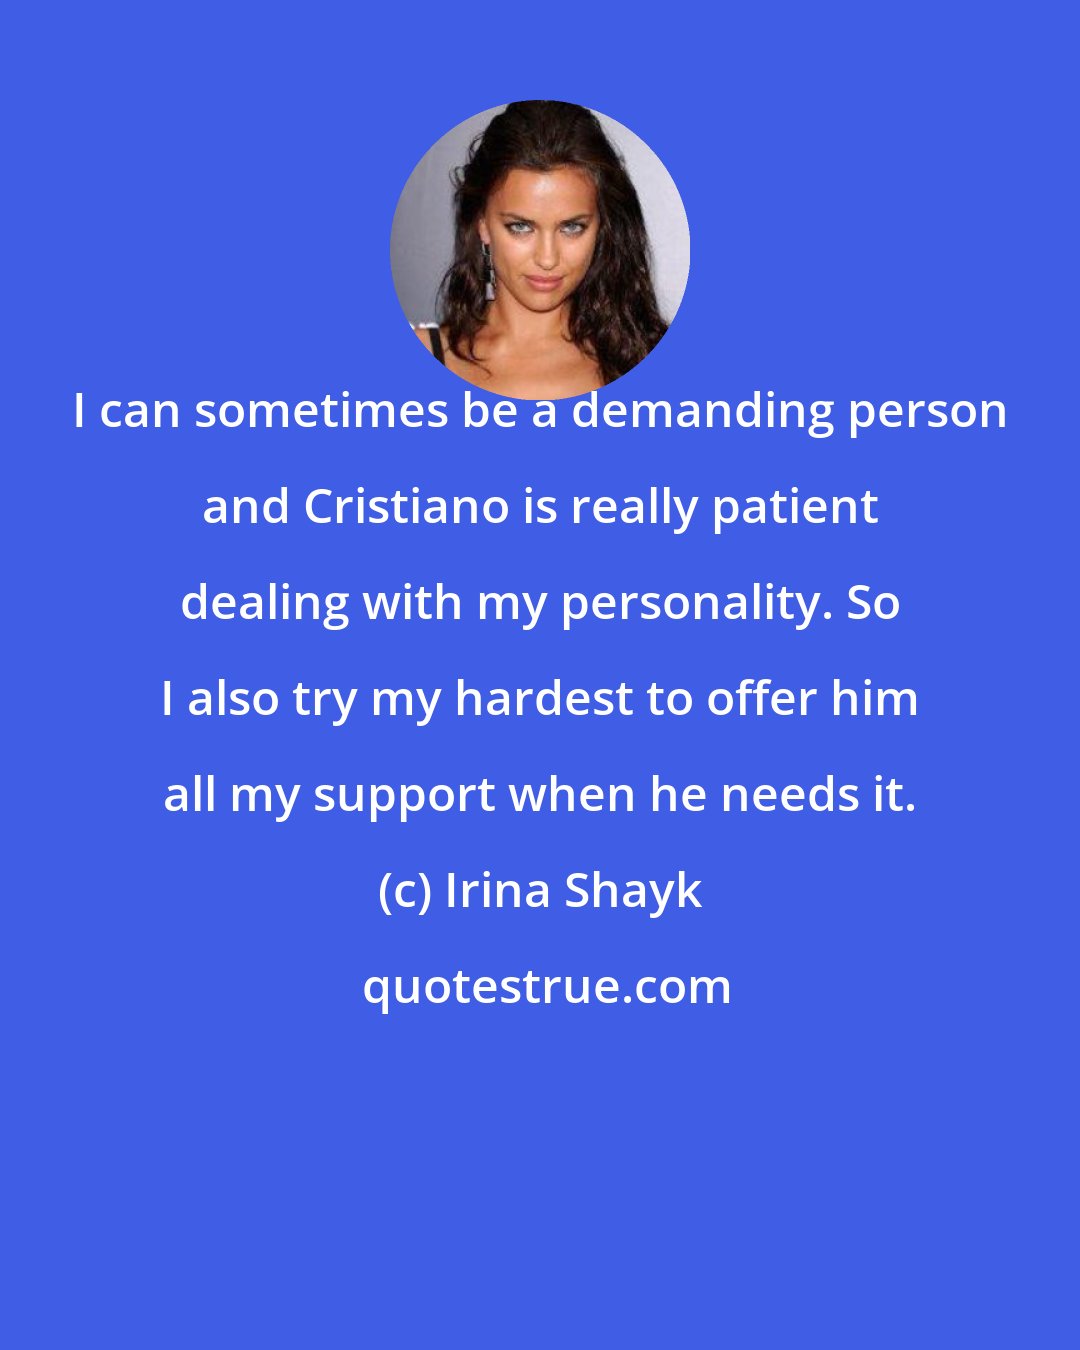 Irina Shayk: I can sometimes be a demanding person and Cristiano is really patient dealing with my personality. So I also try my hardest to offer him all my support when he needs it.